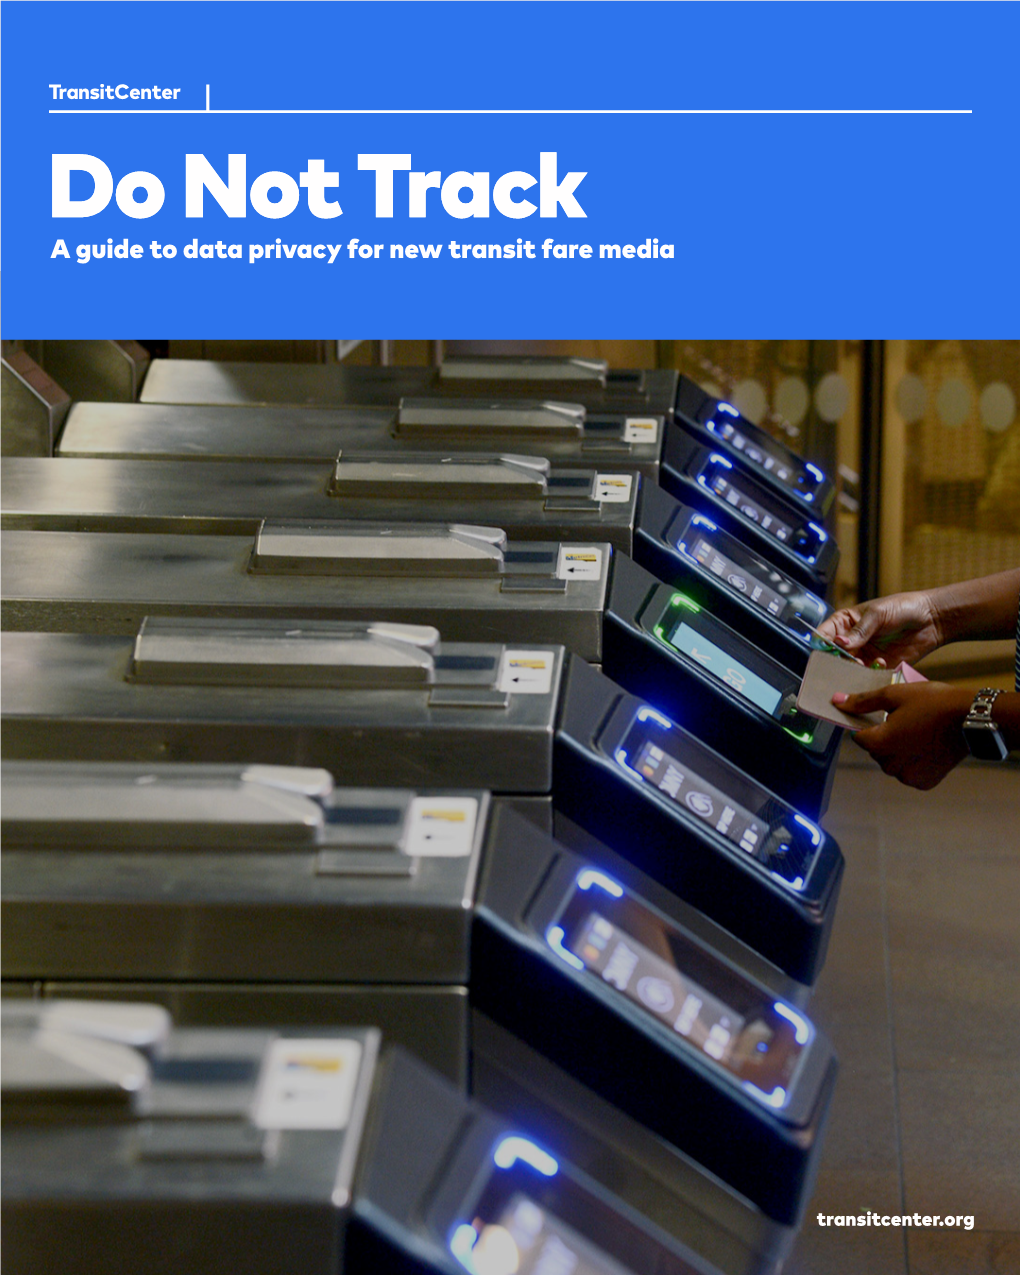 Do Not Track: a Guide to Data Privacy for New Transit Fare Media